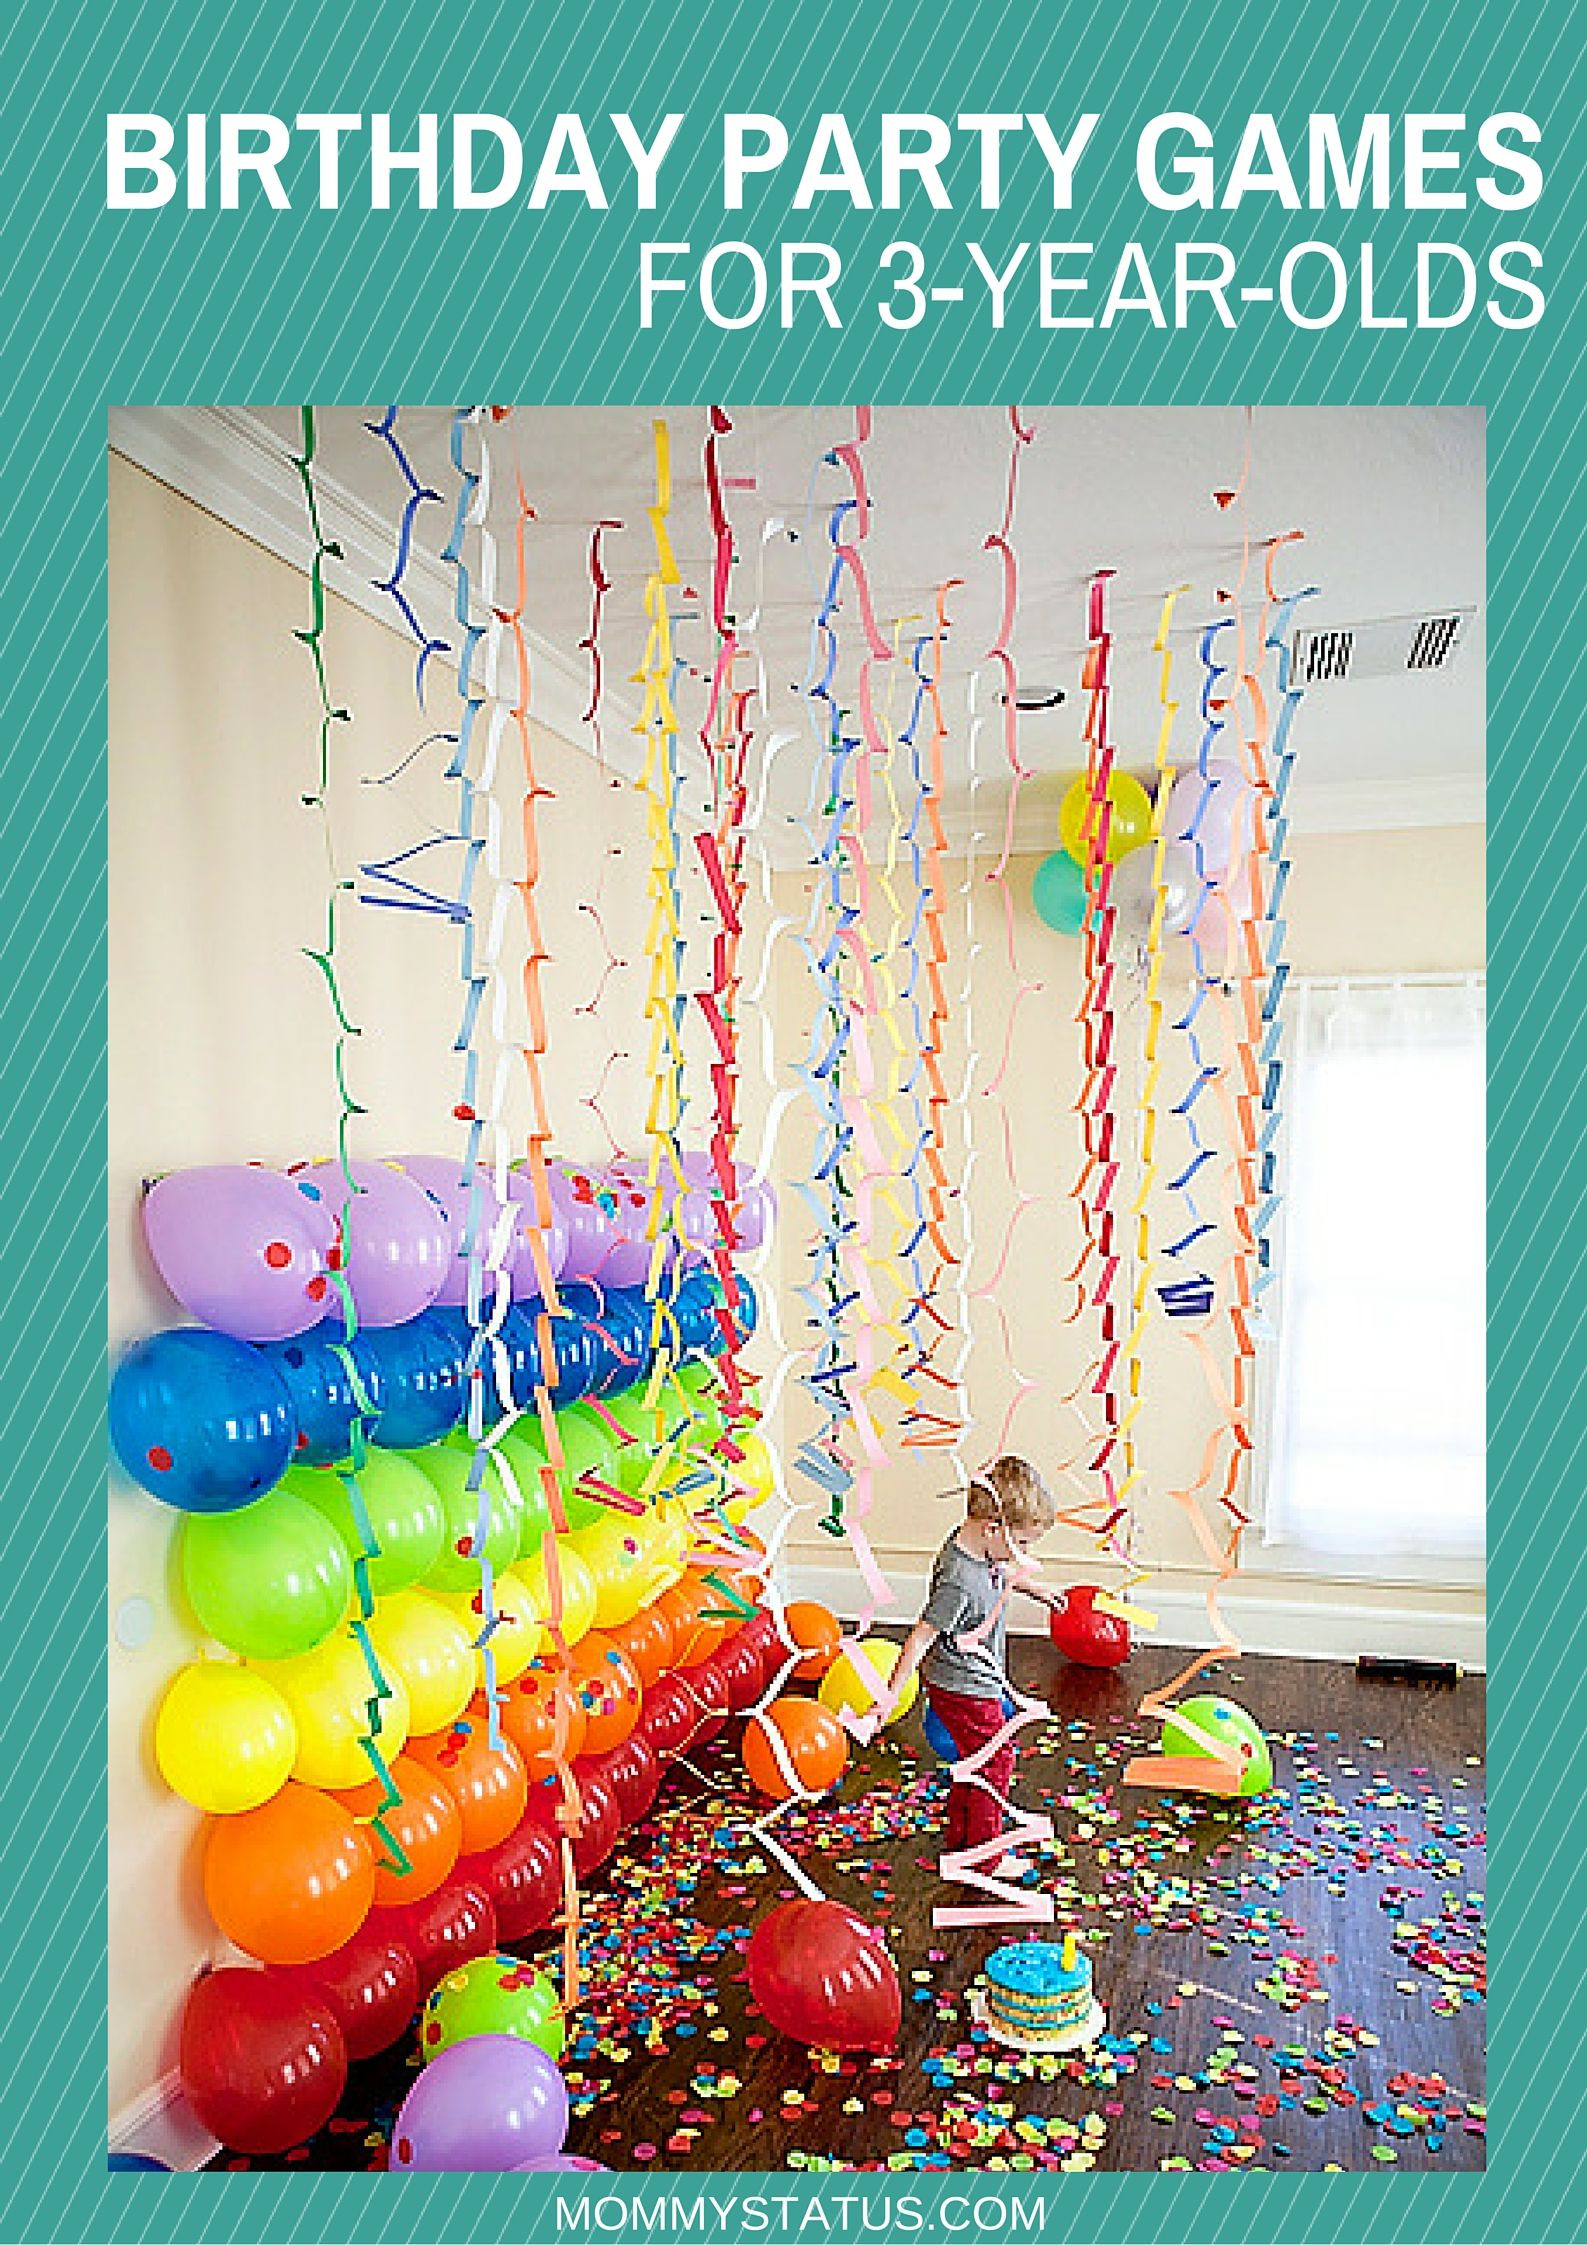 Two Years Old Birthday Party Ideas
 BIRTHDAY PARTY GAMES FOR 3 YEAR OLDS